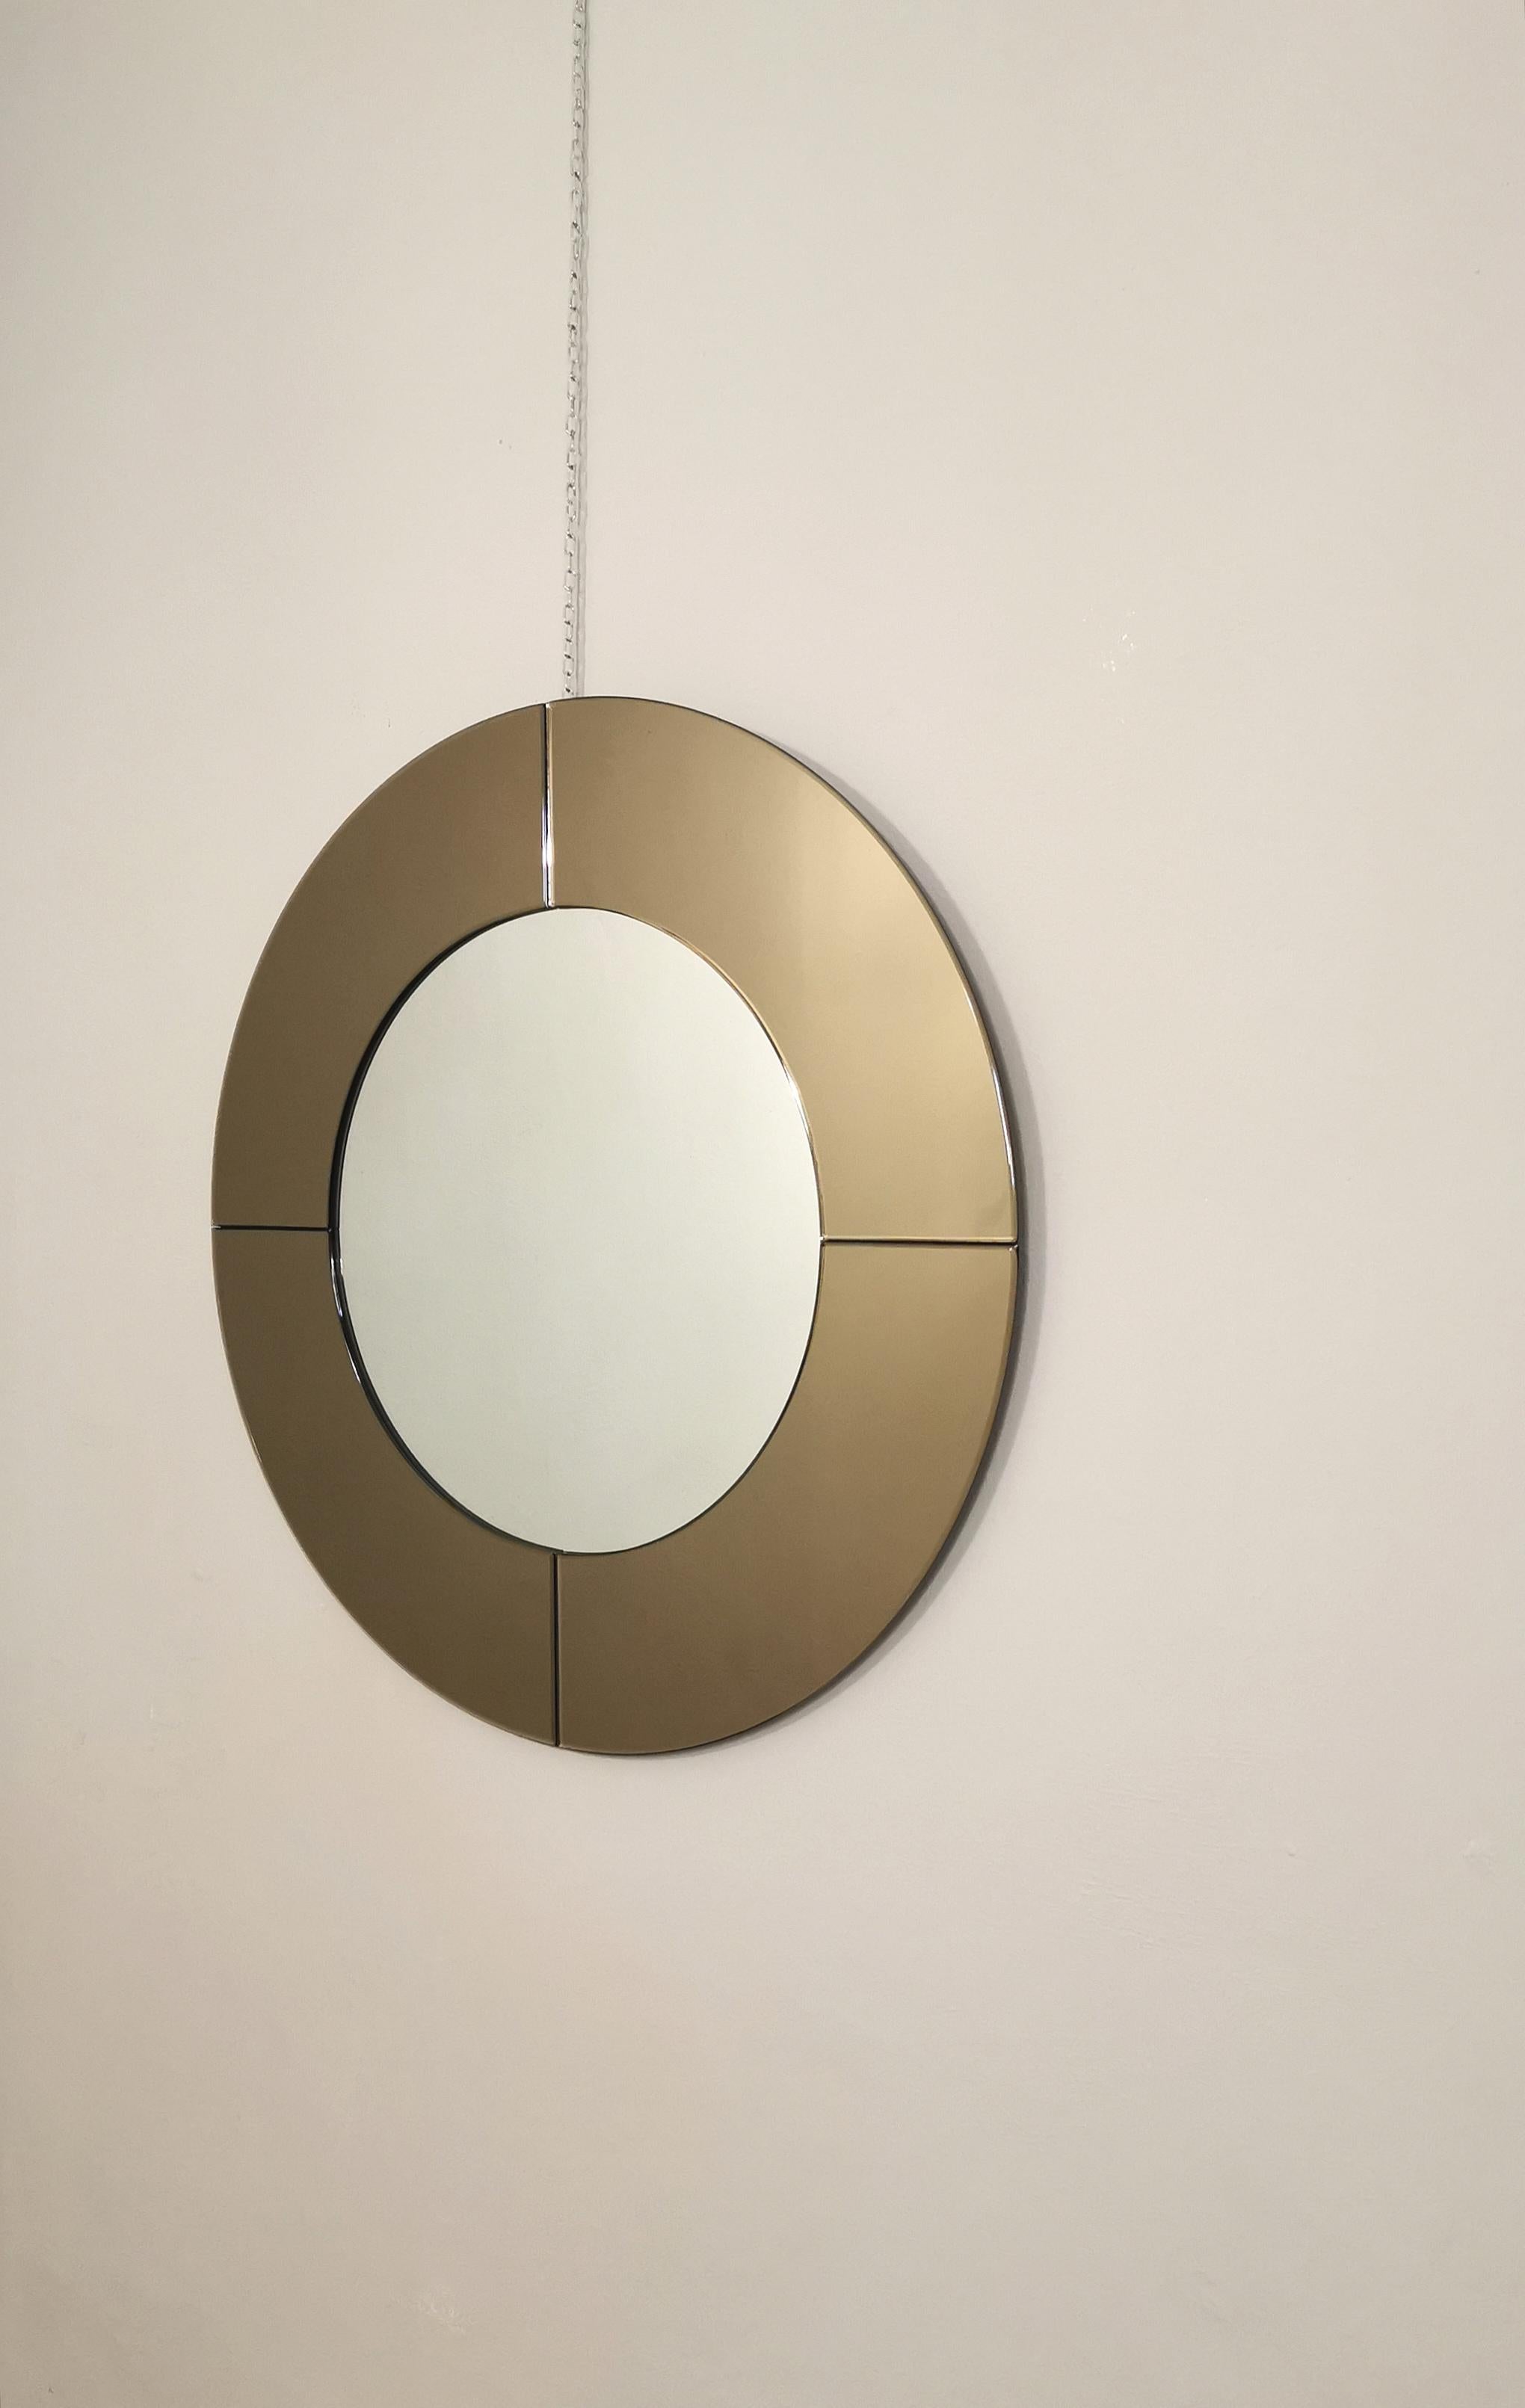 Midcentury Wall Mirror Mirrored Glass Smoked Round Large Italian Design 1970s For Sale 1